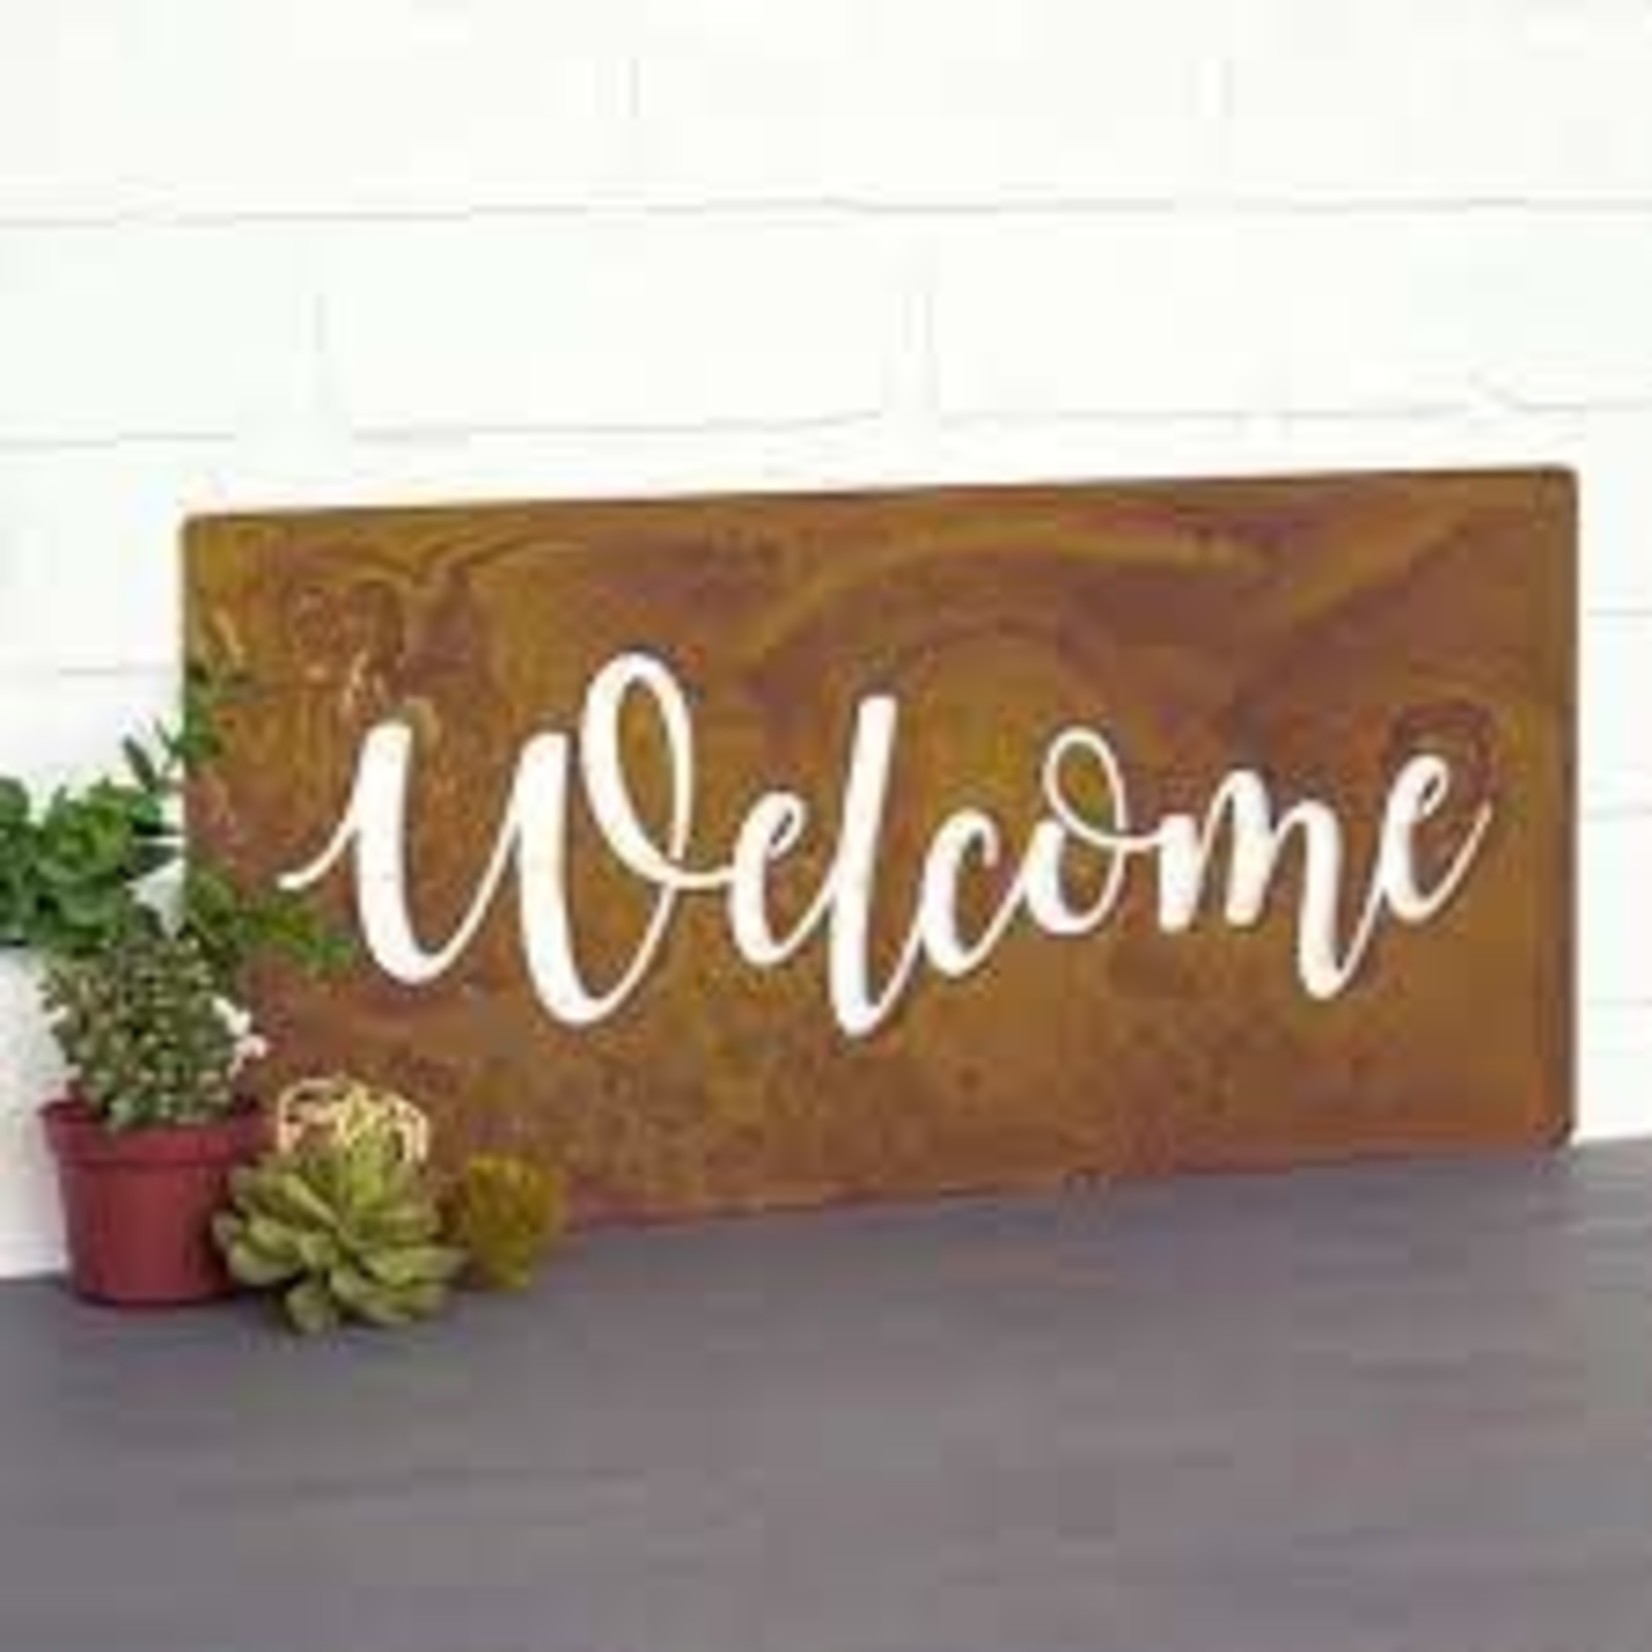 Prairie Dance Welcome Wall Plaque Rust Finish